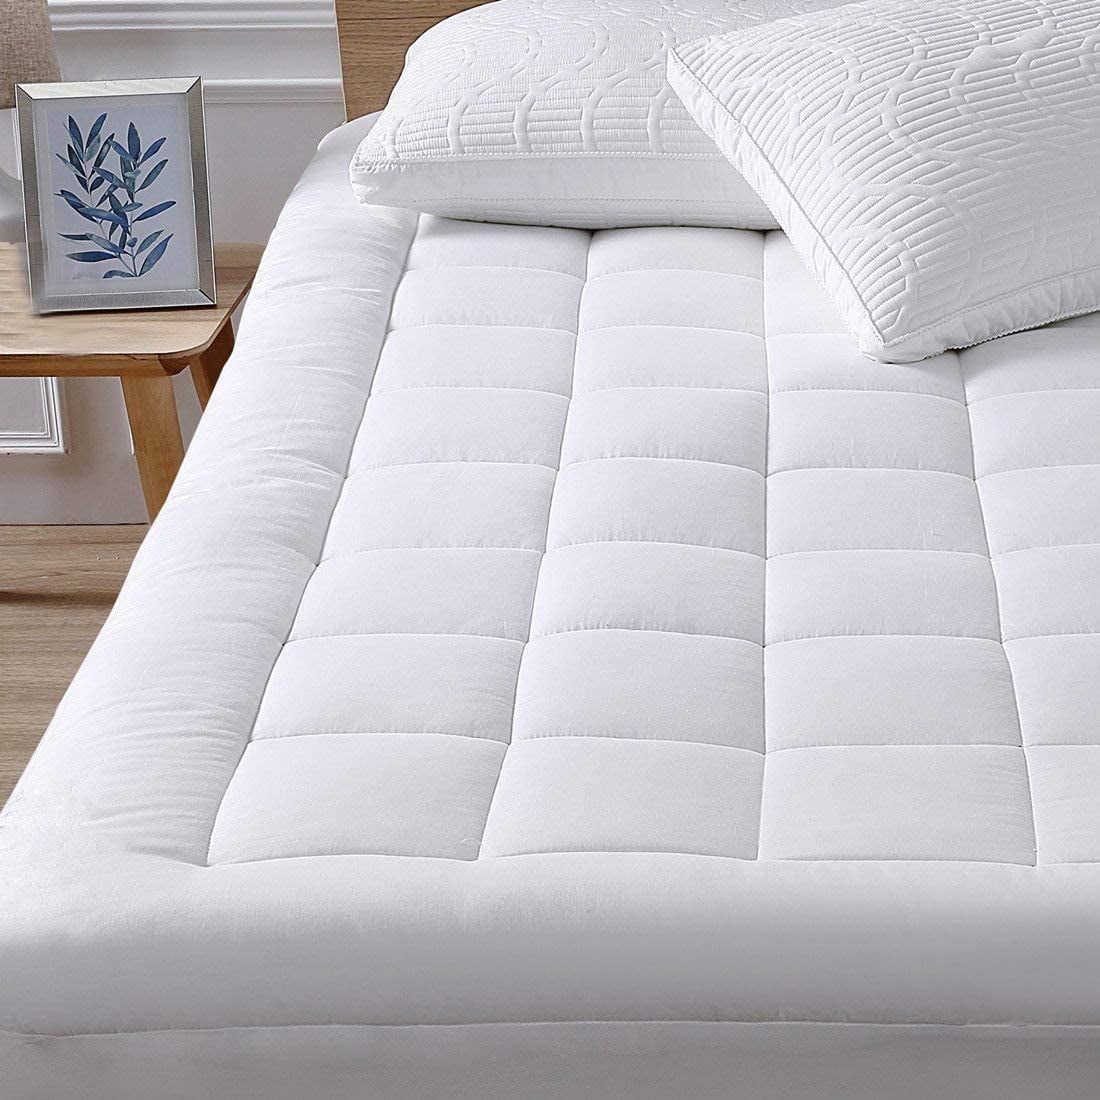 Cal King-Size Mattress Pad Extra Thick White Padded Deep Pocket Bed Cover Topper 